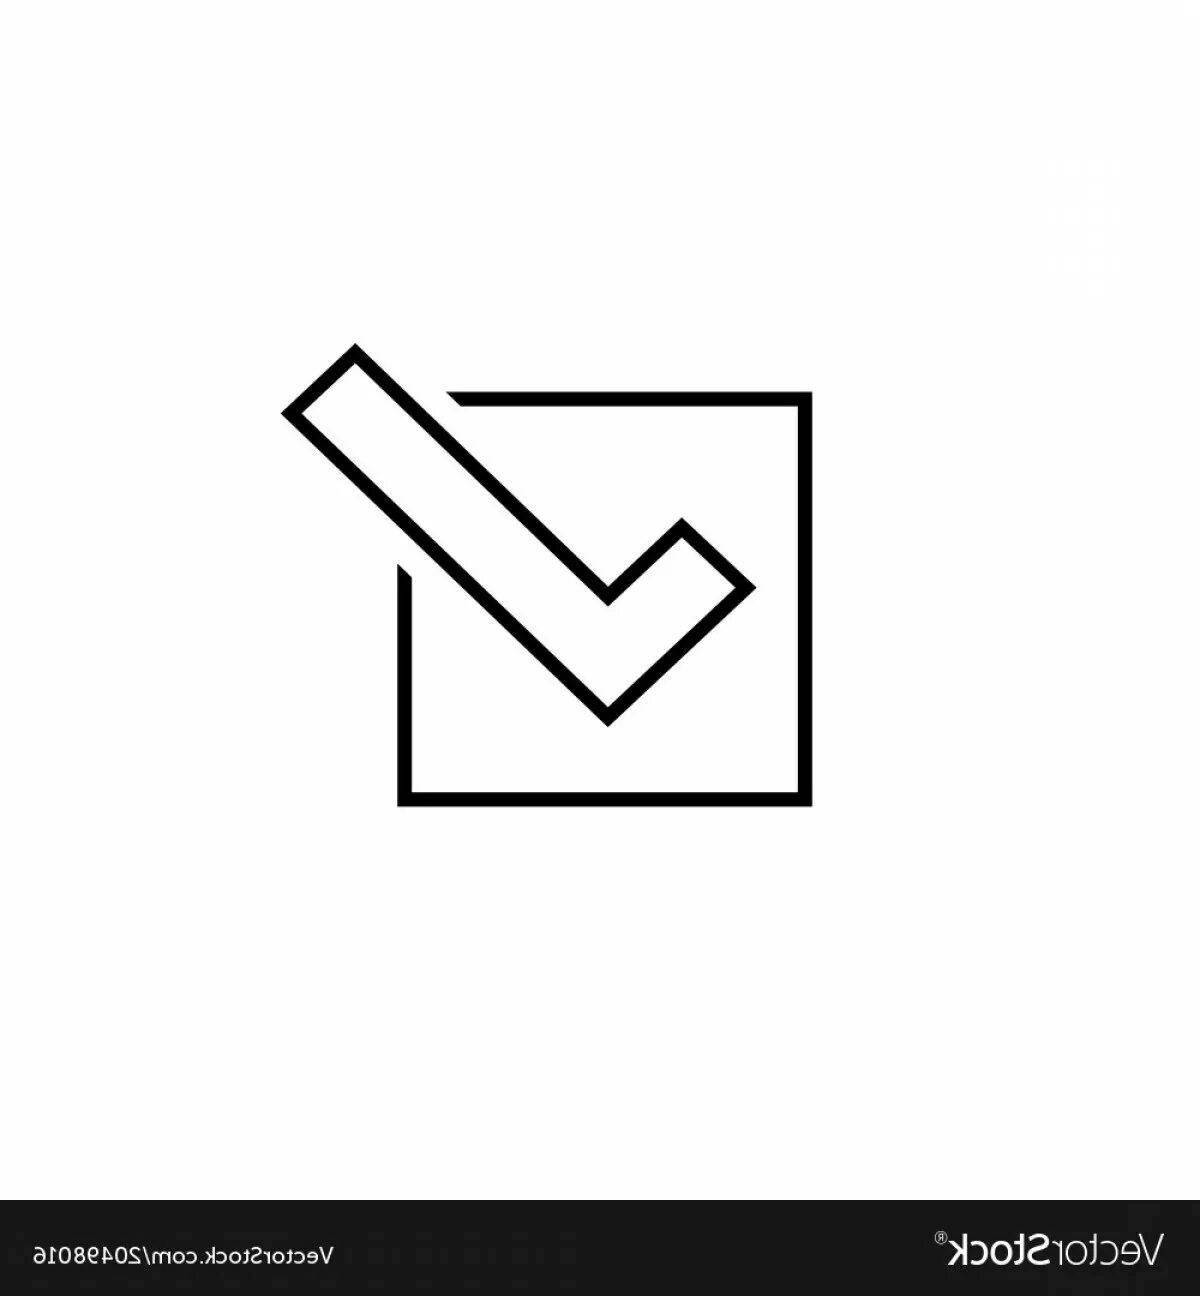 Coloring page with colorful check mark